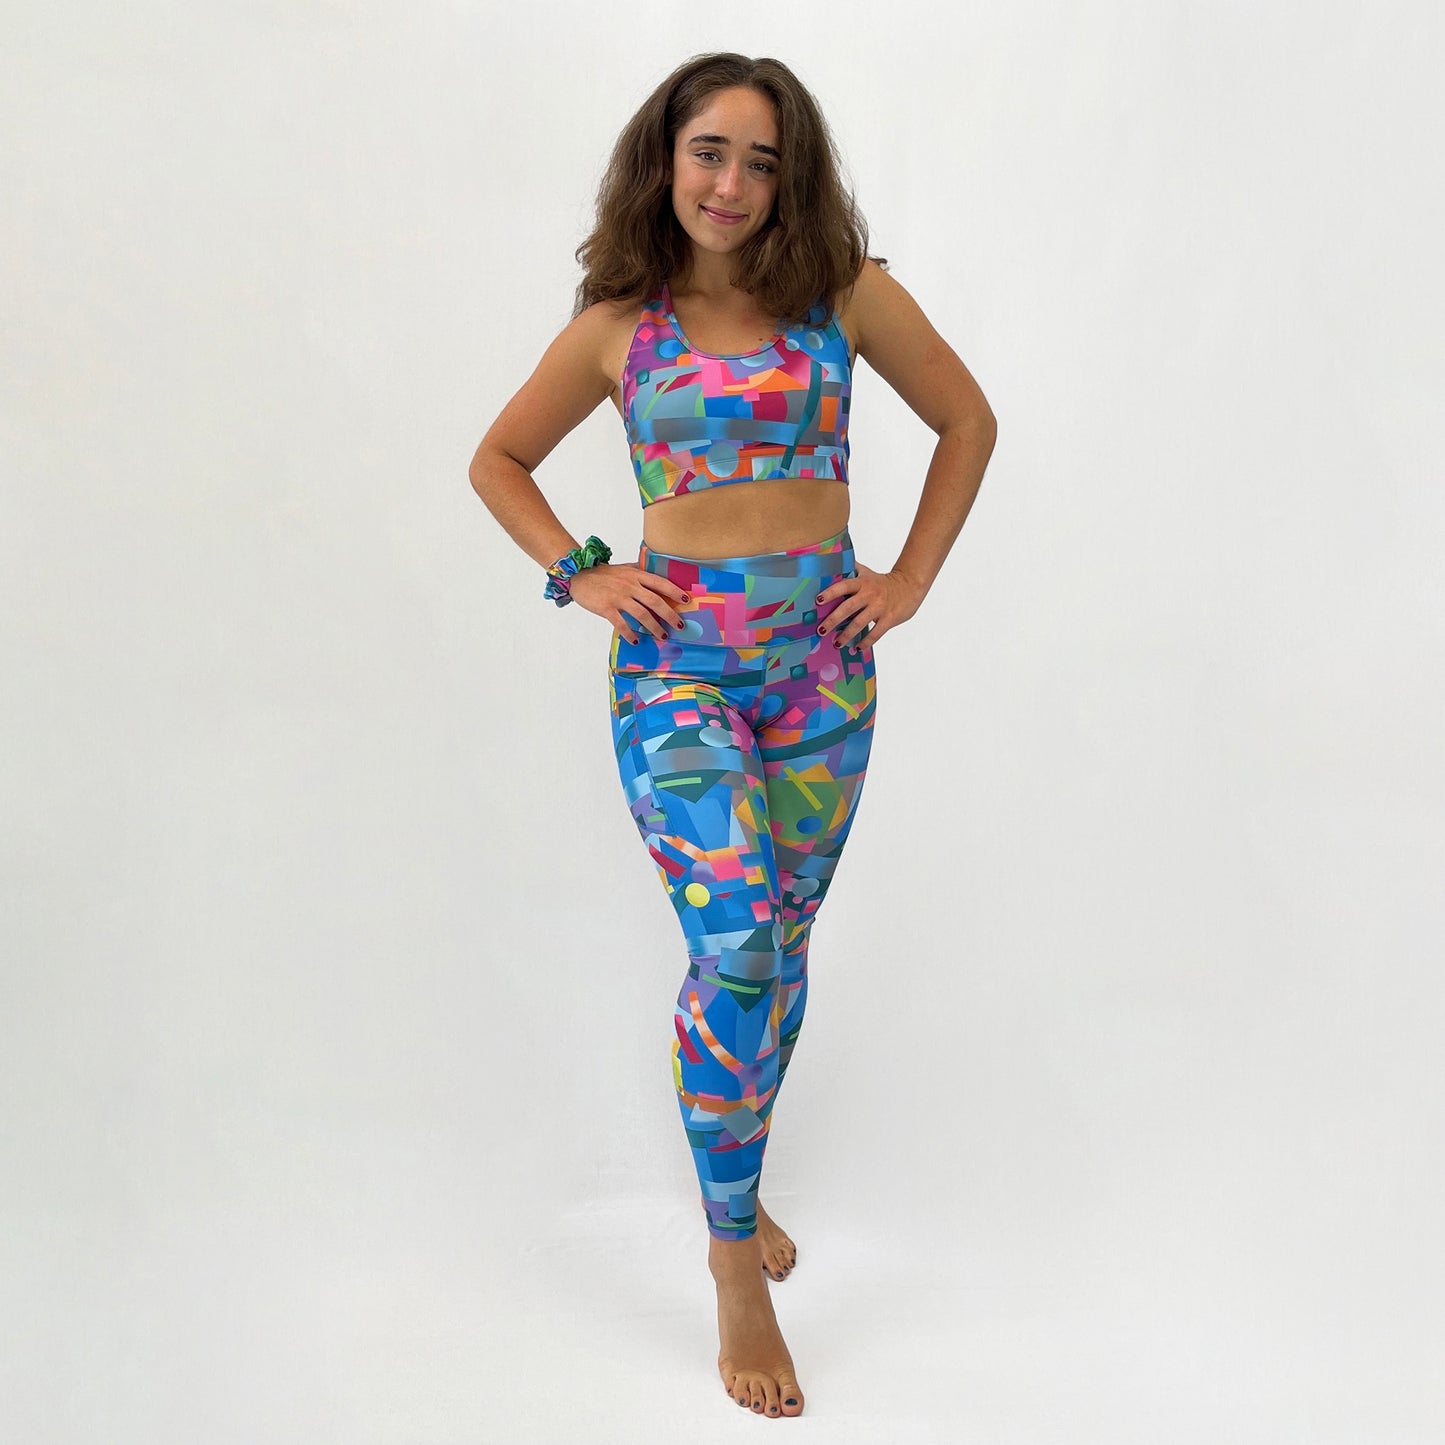 colourful sports bra made sustainably from recycled materials - Geometric - full body